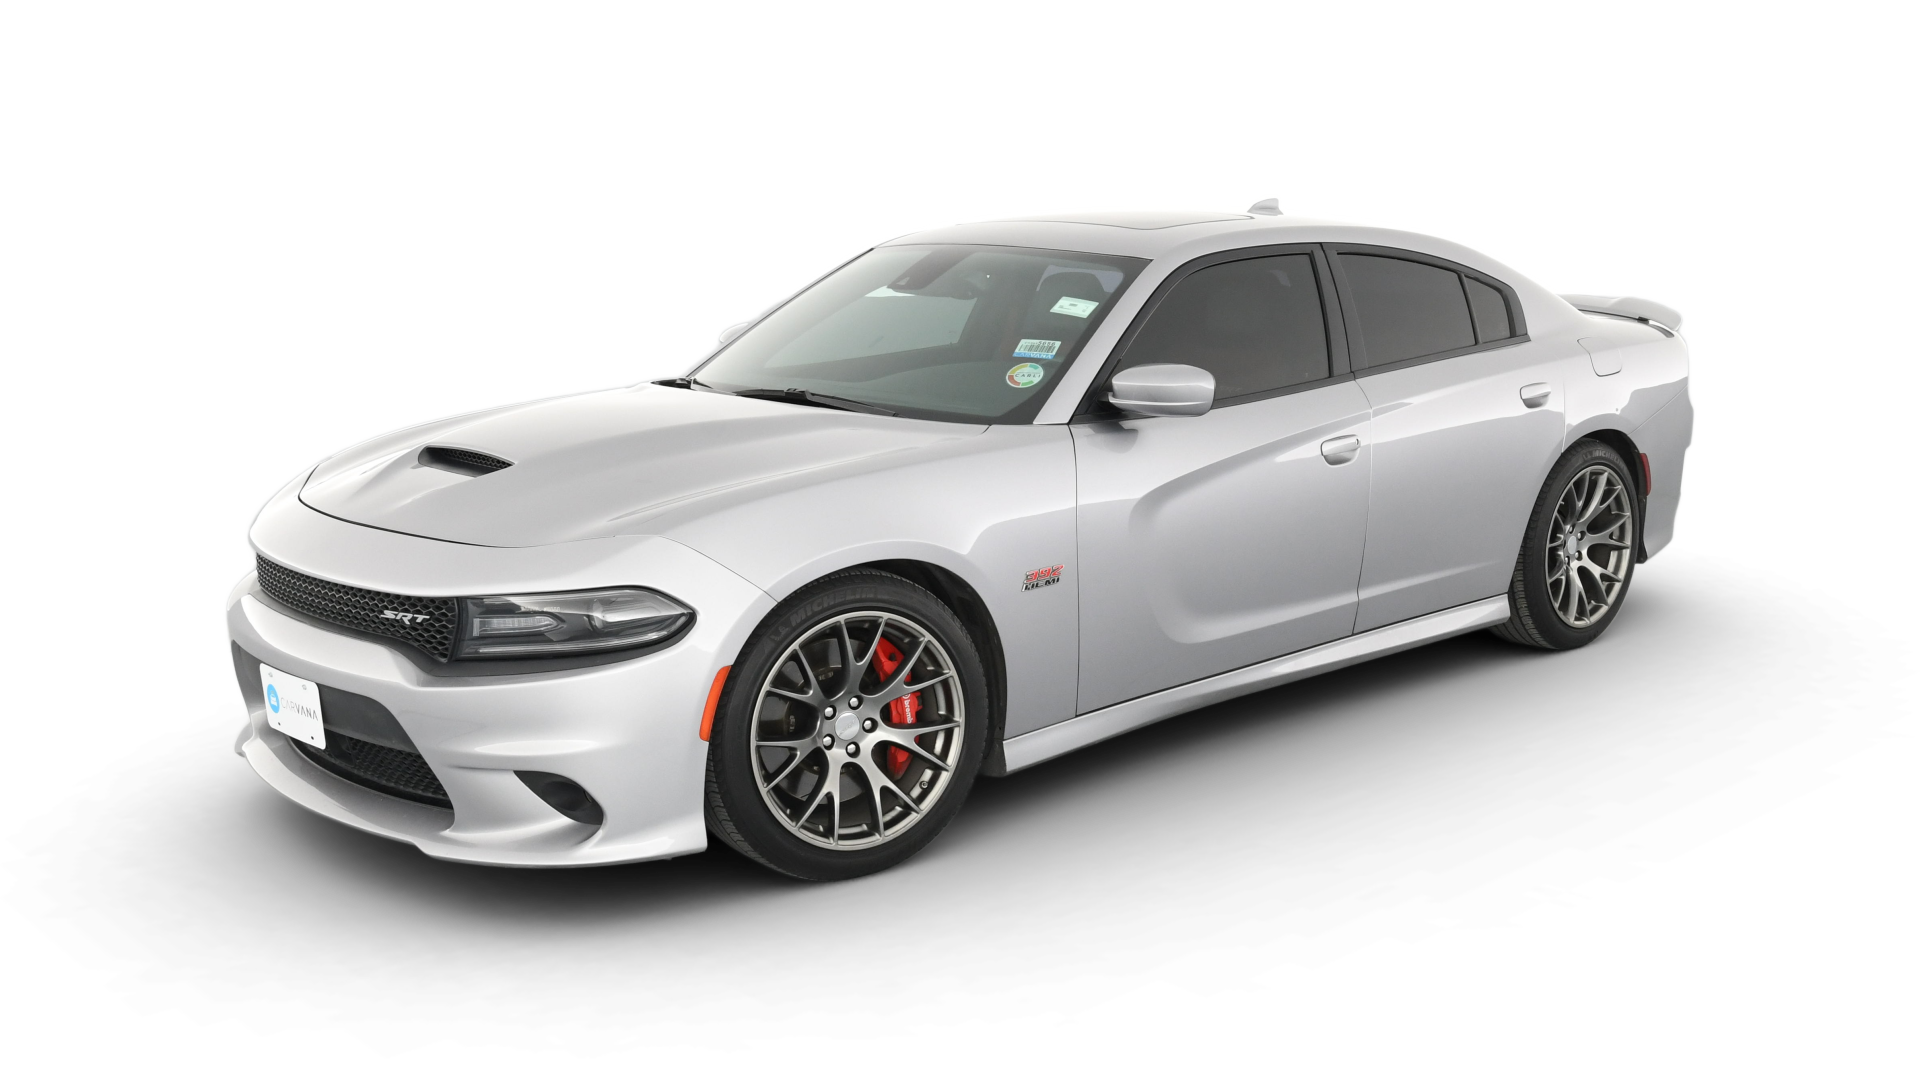 Used Dodge Charger For Sale Online | Carvana